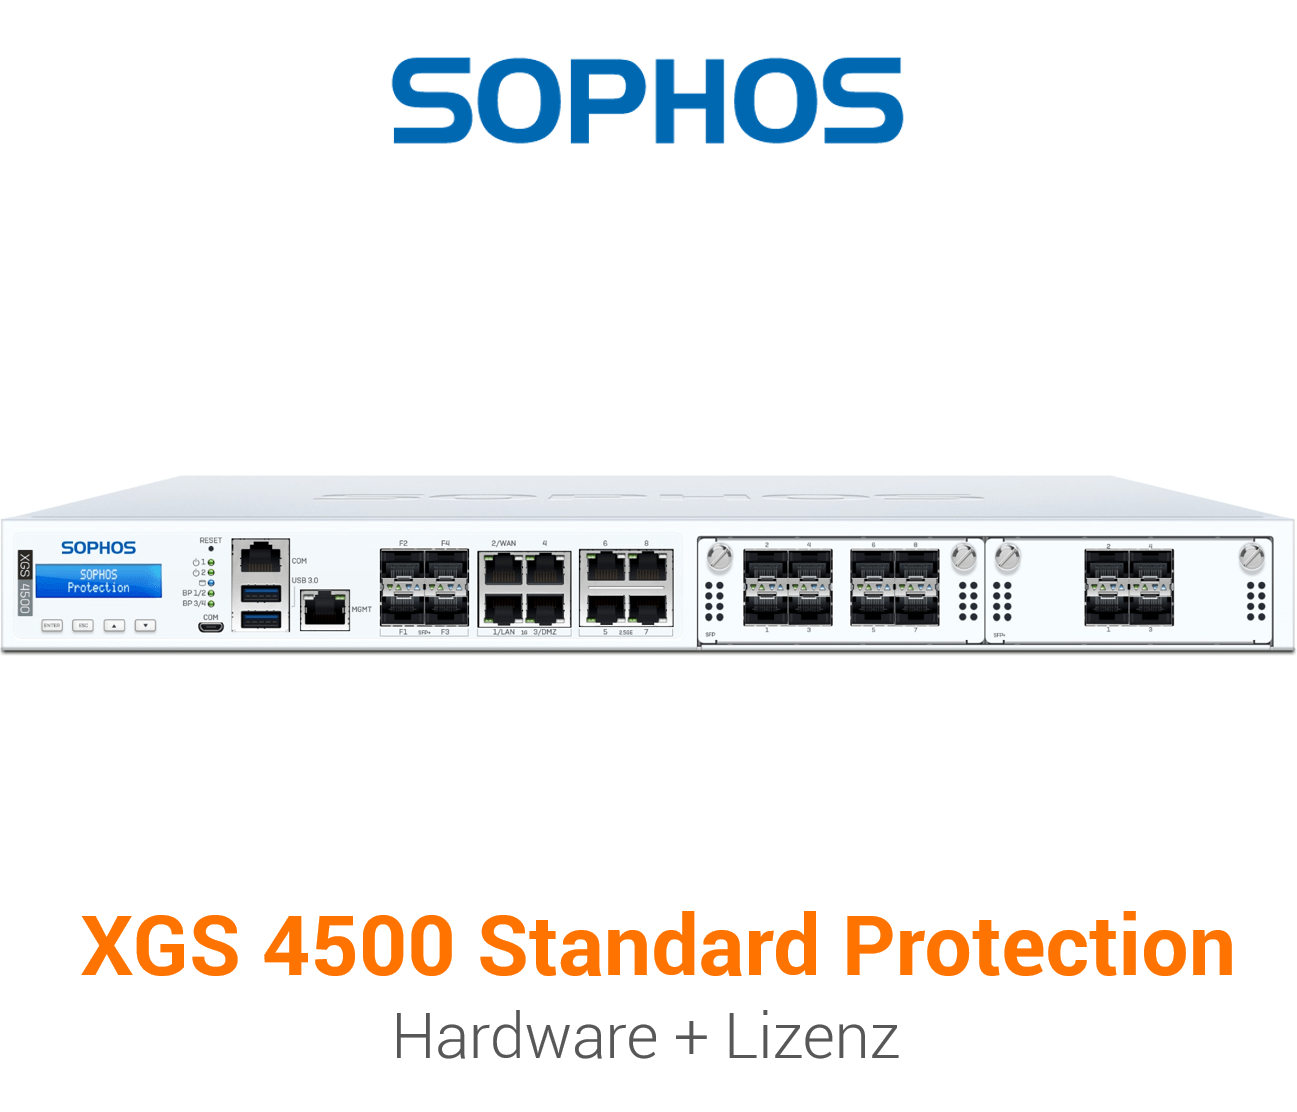 Sophos XGS 4500 mit Standard Protection